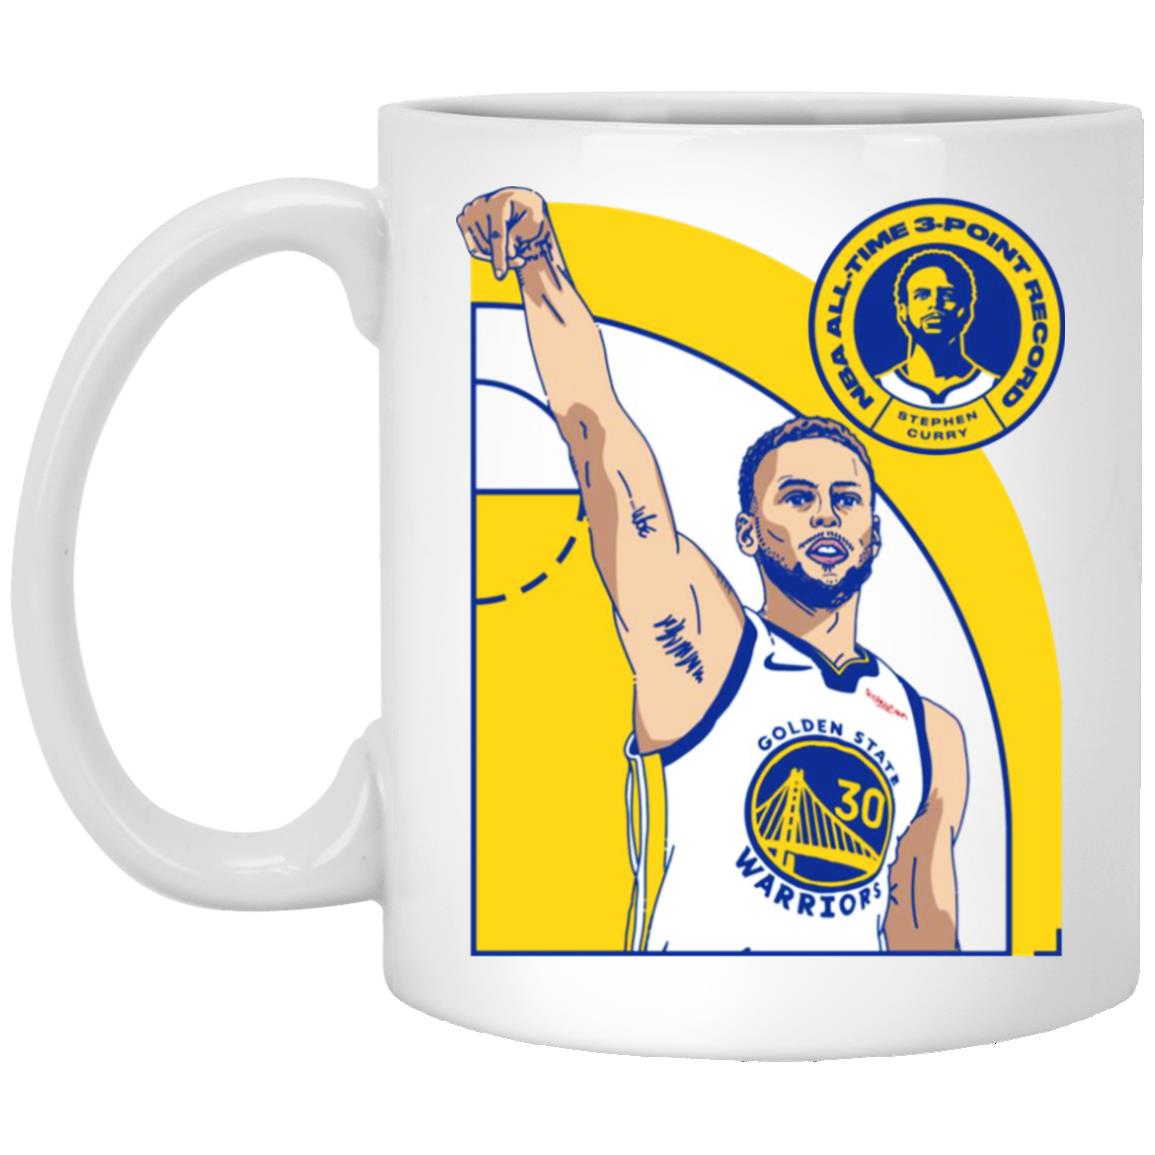 Curry All Time 3PT Record Mugs